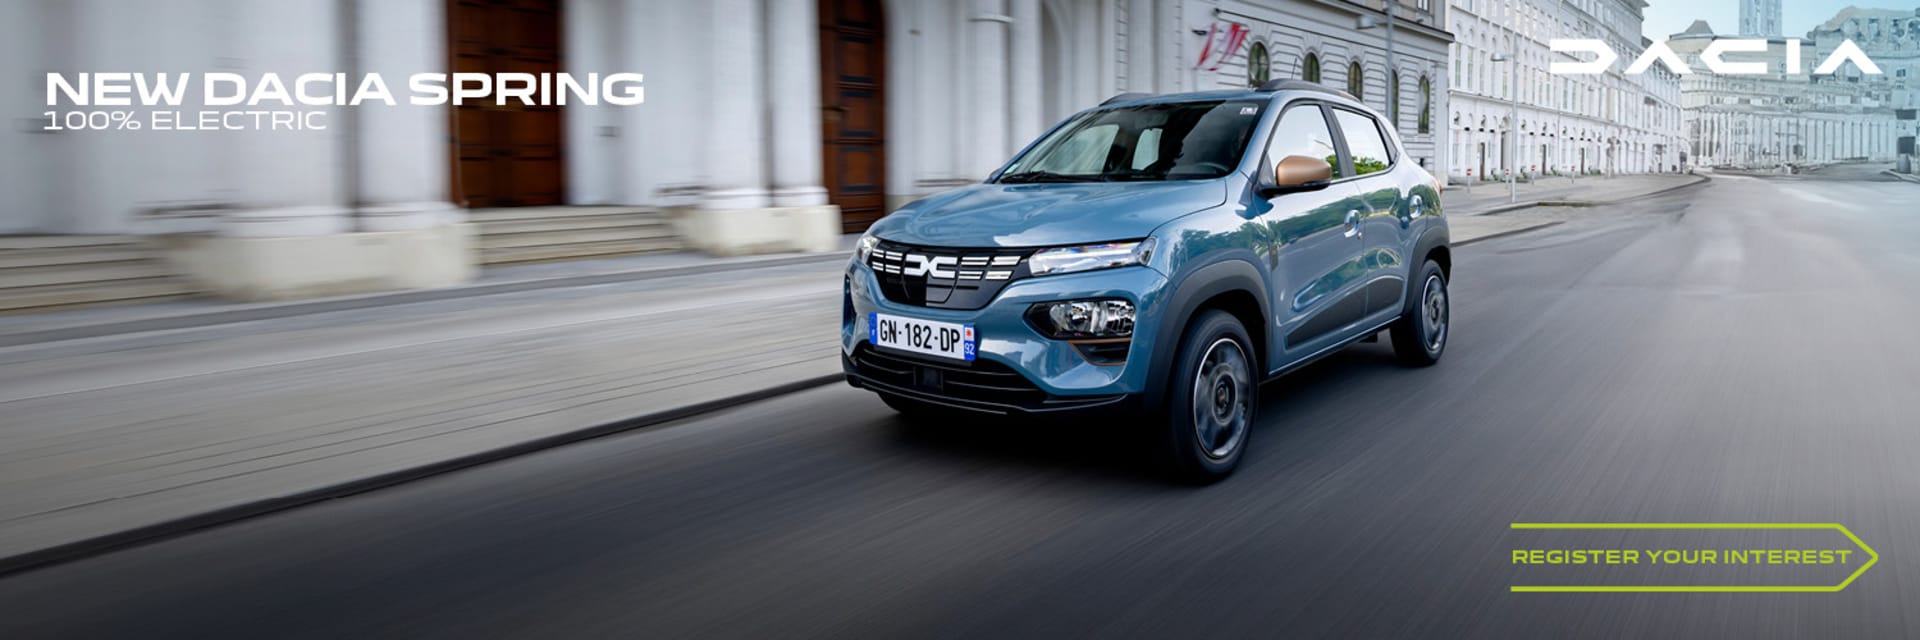 Dacia Spring EV is coming-Register your interest